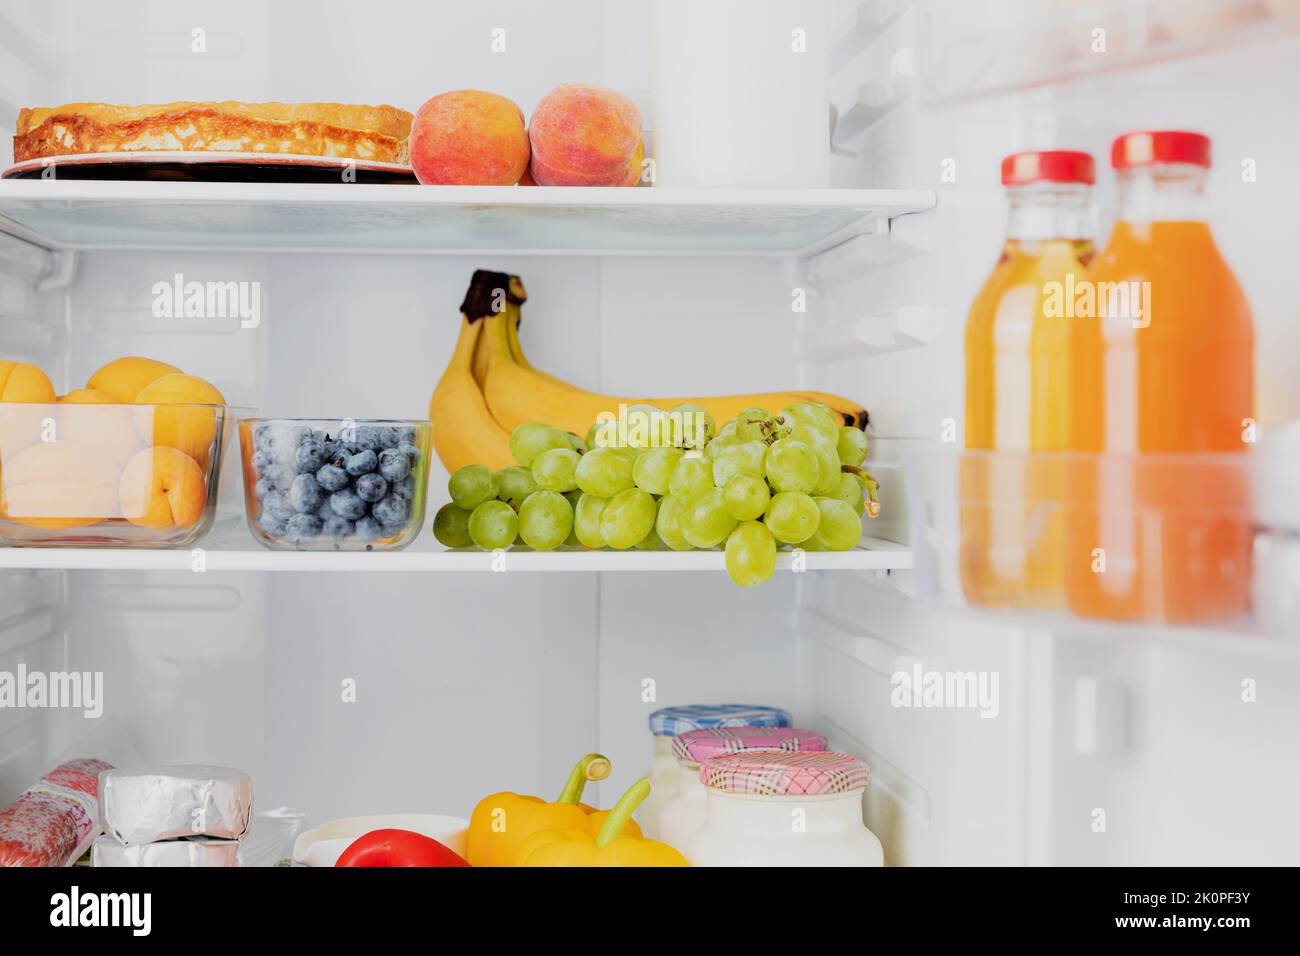 Front View of open two door fridge or refrigerator door filled with fresh fruits, vegetables, juice, full of healthy food items and ingredients inside. Electric Kitchen and Domestic Major Appliances Stock Photo